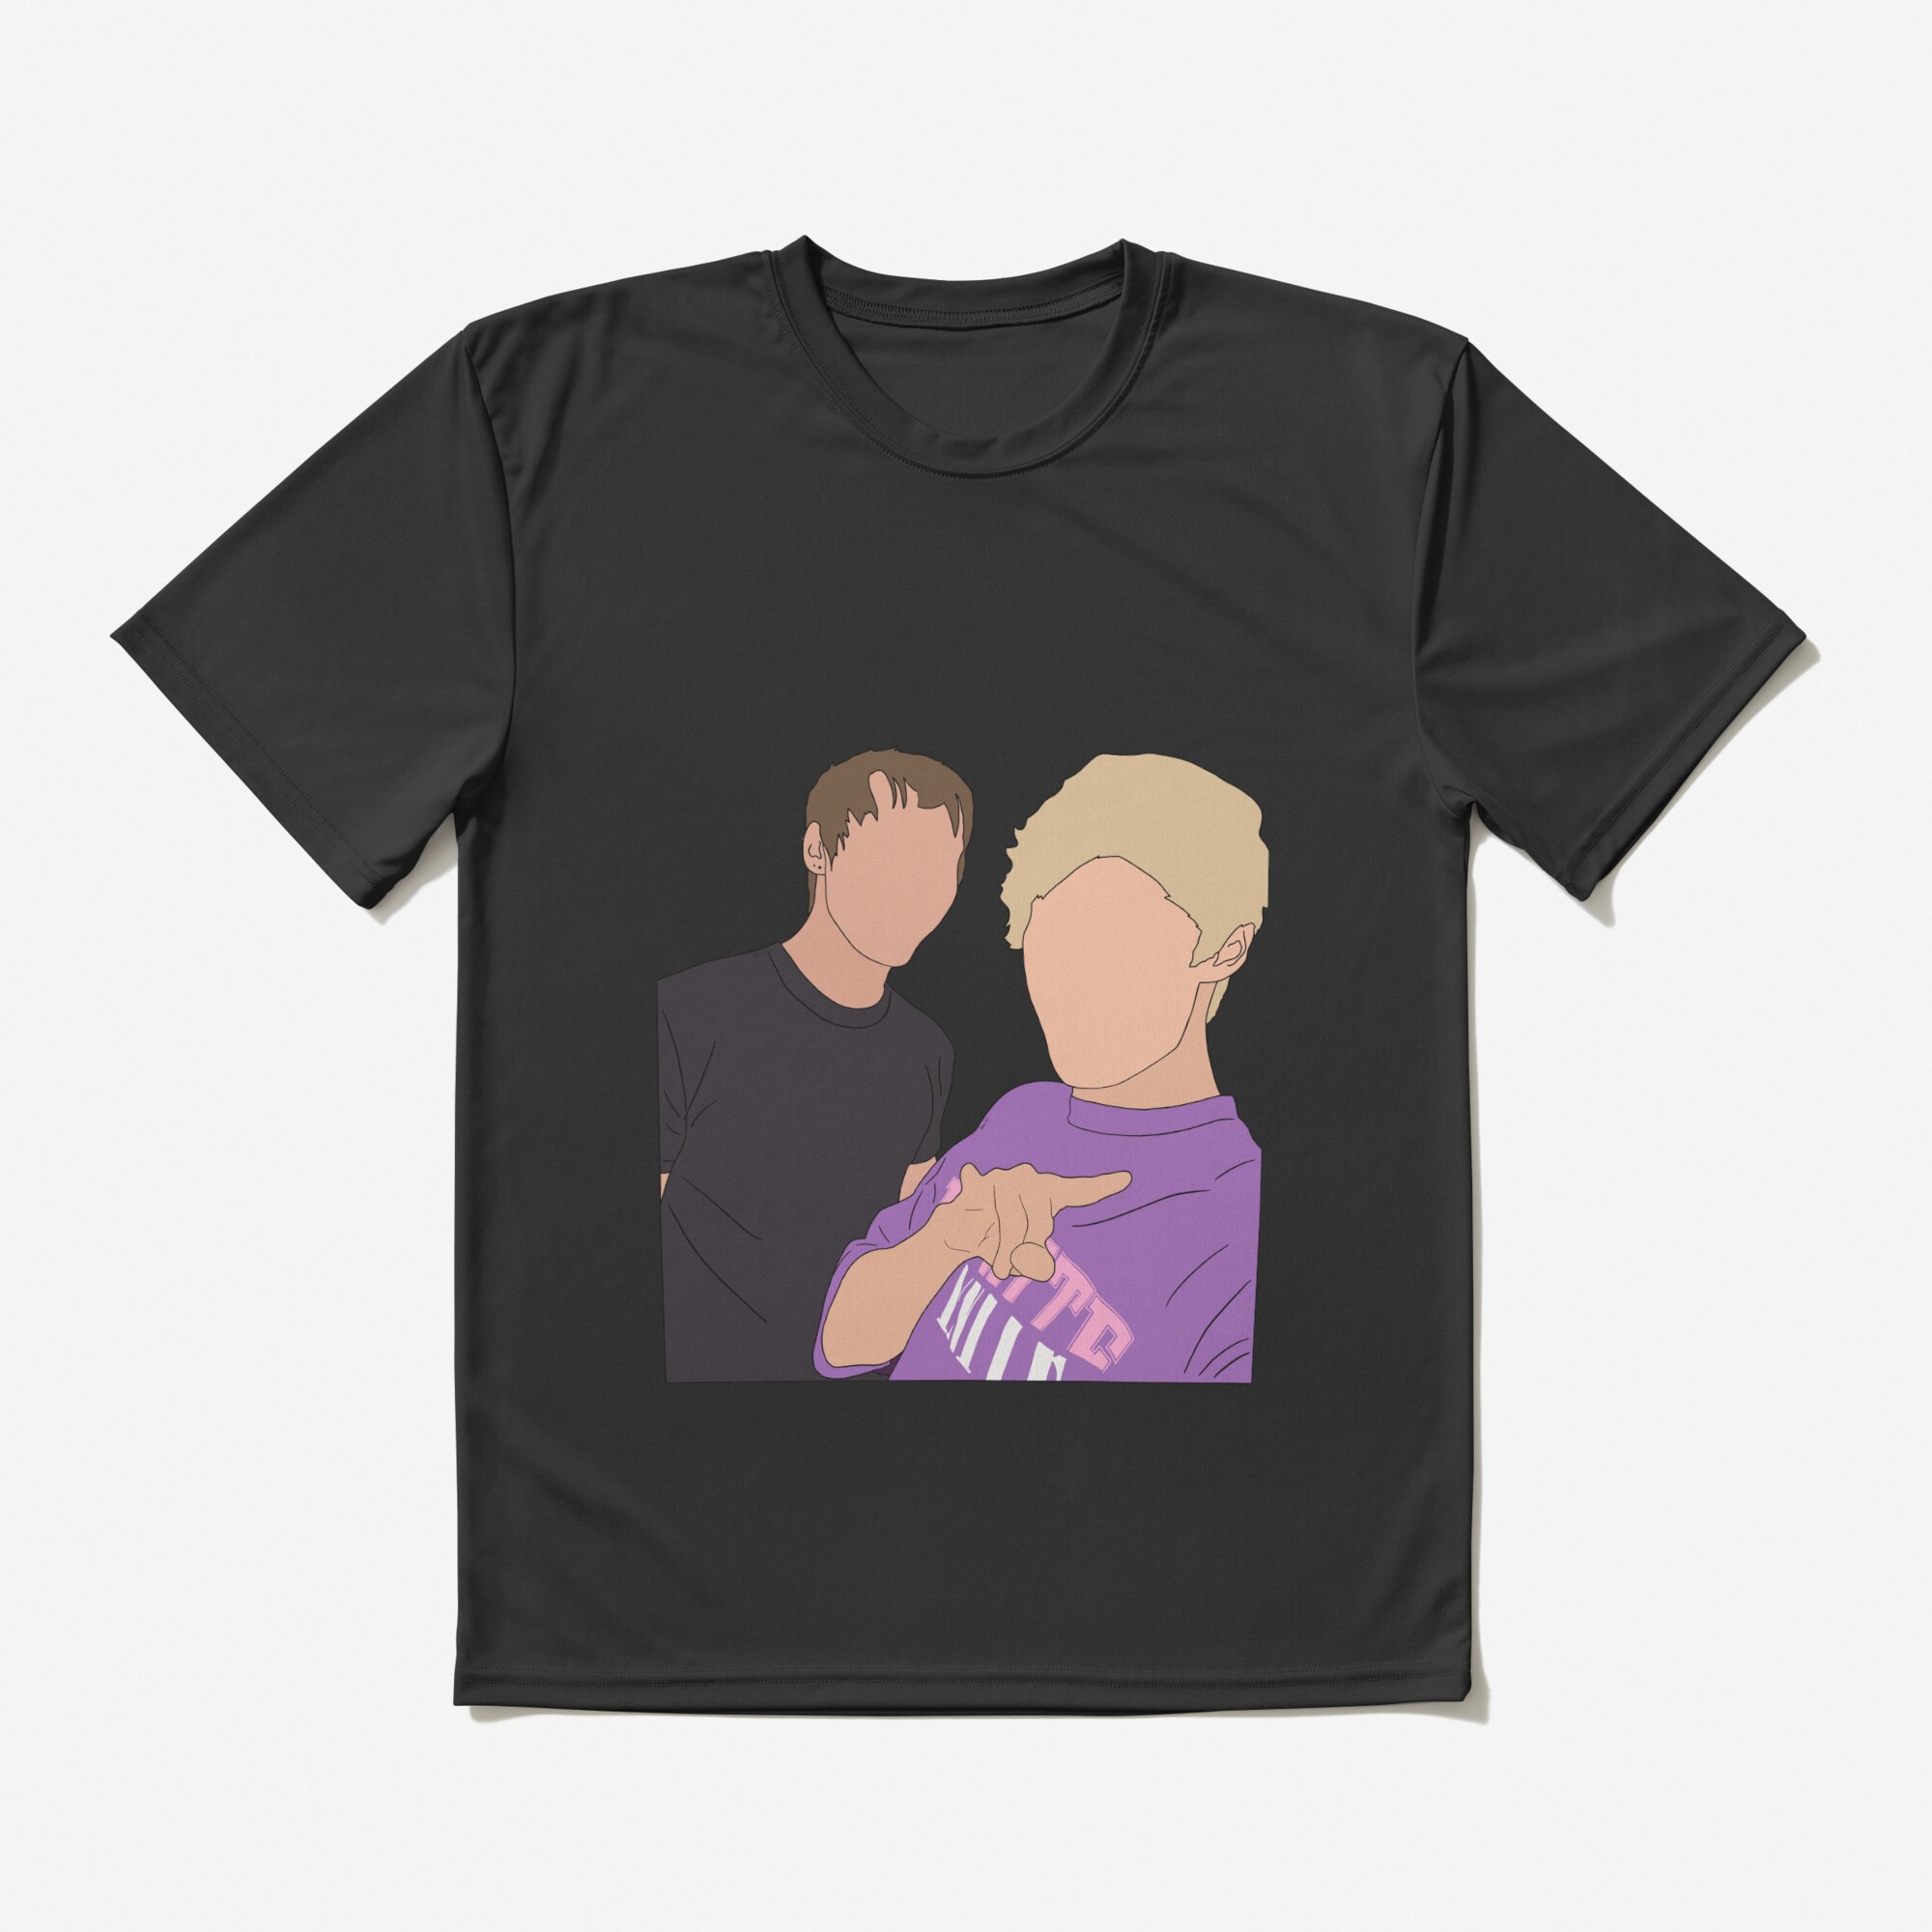 ssrcoactive tshirtflatlay10101001c5ca27c6frontsquare2000x2000 9 - Sam And Colby Shop